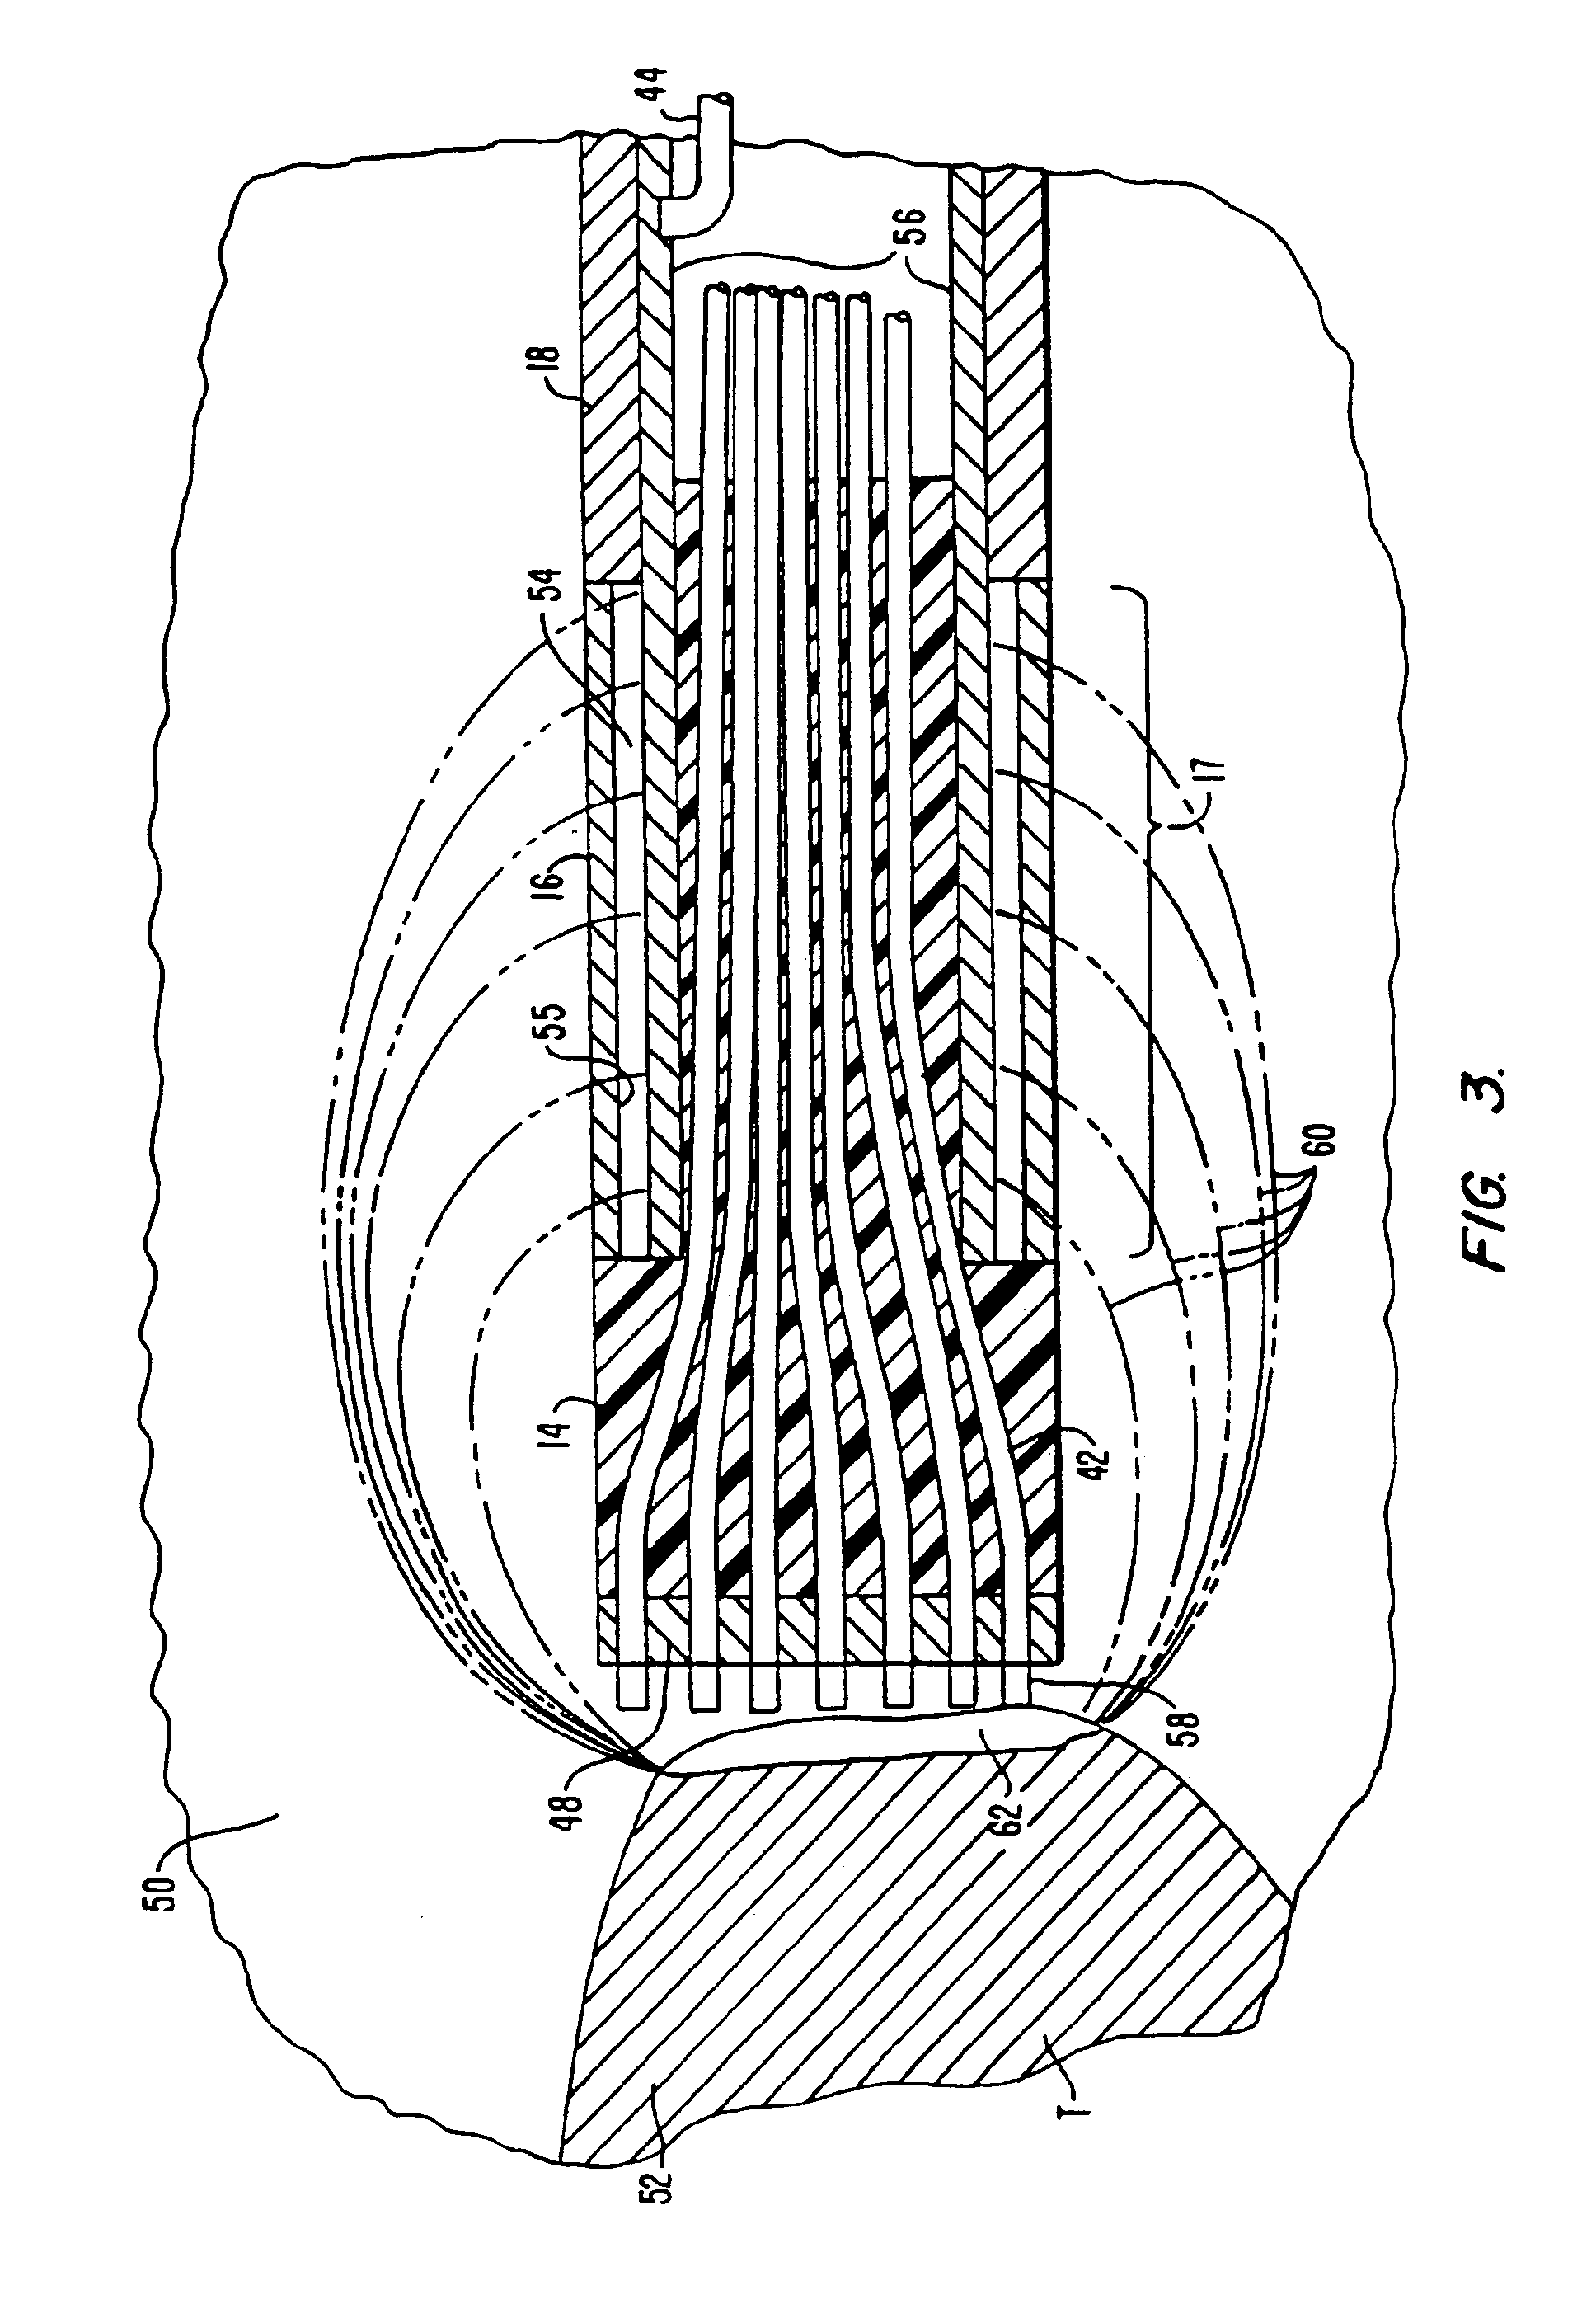 Electrosurgical method using laterally arranged active electrode